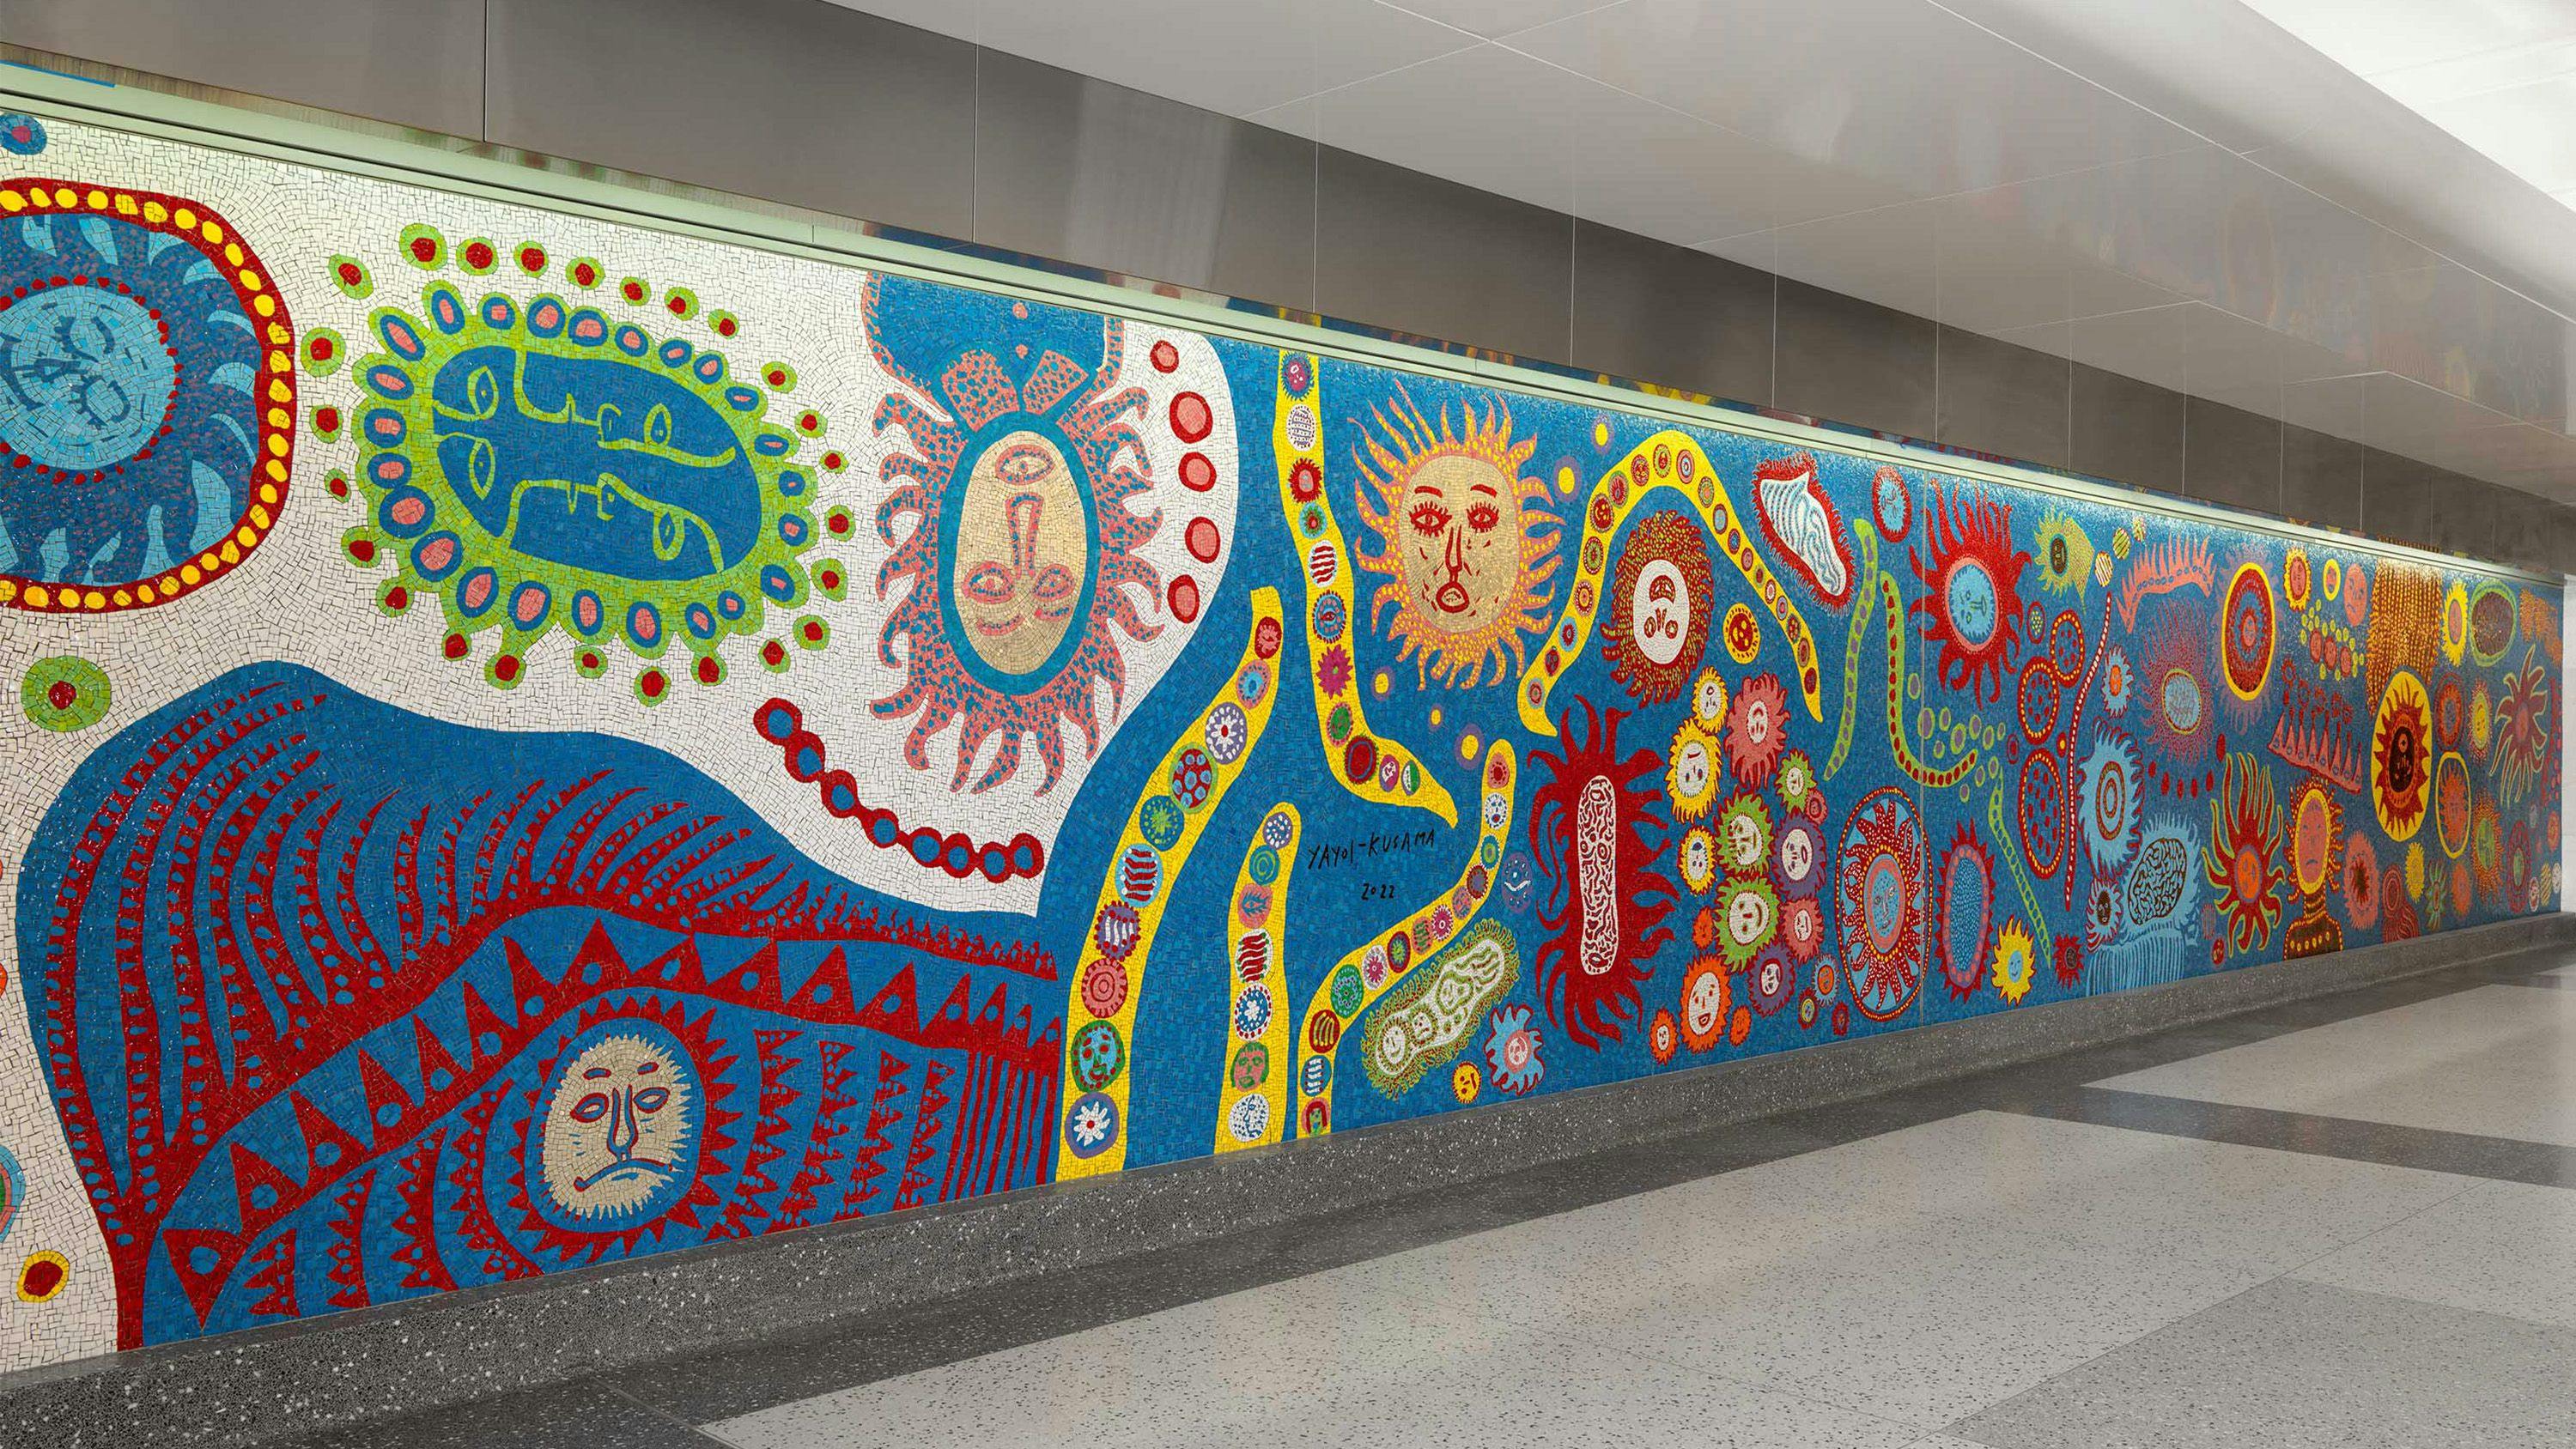 Installation view of Yayoi Kusama’s artwork, A Message of Love, Directly from My Heart unto the Universe, commissioned by MTA Arts & Design and New York City Transit